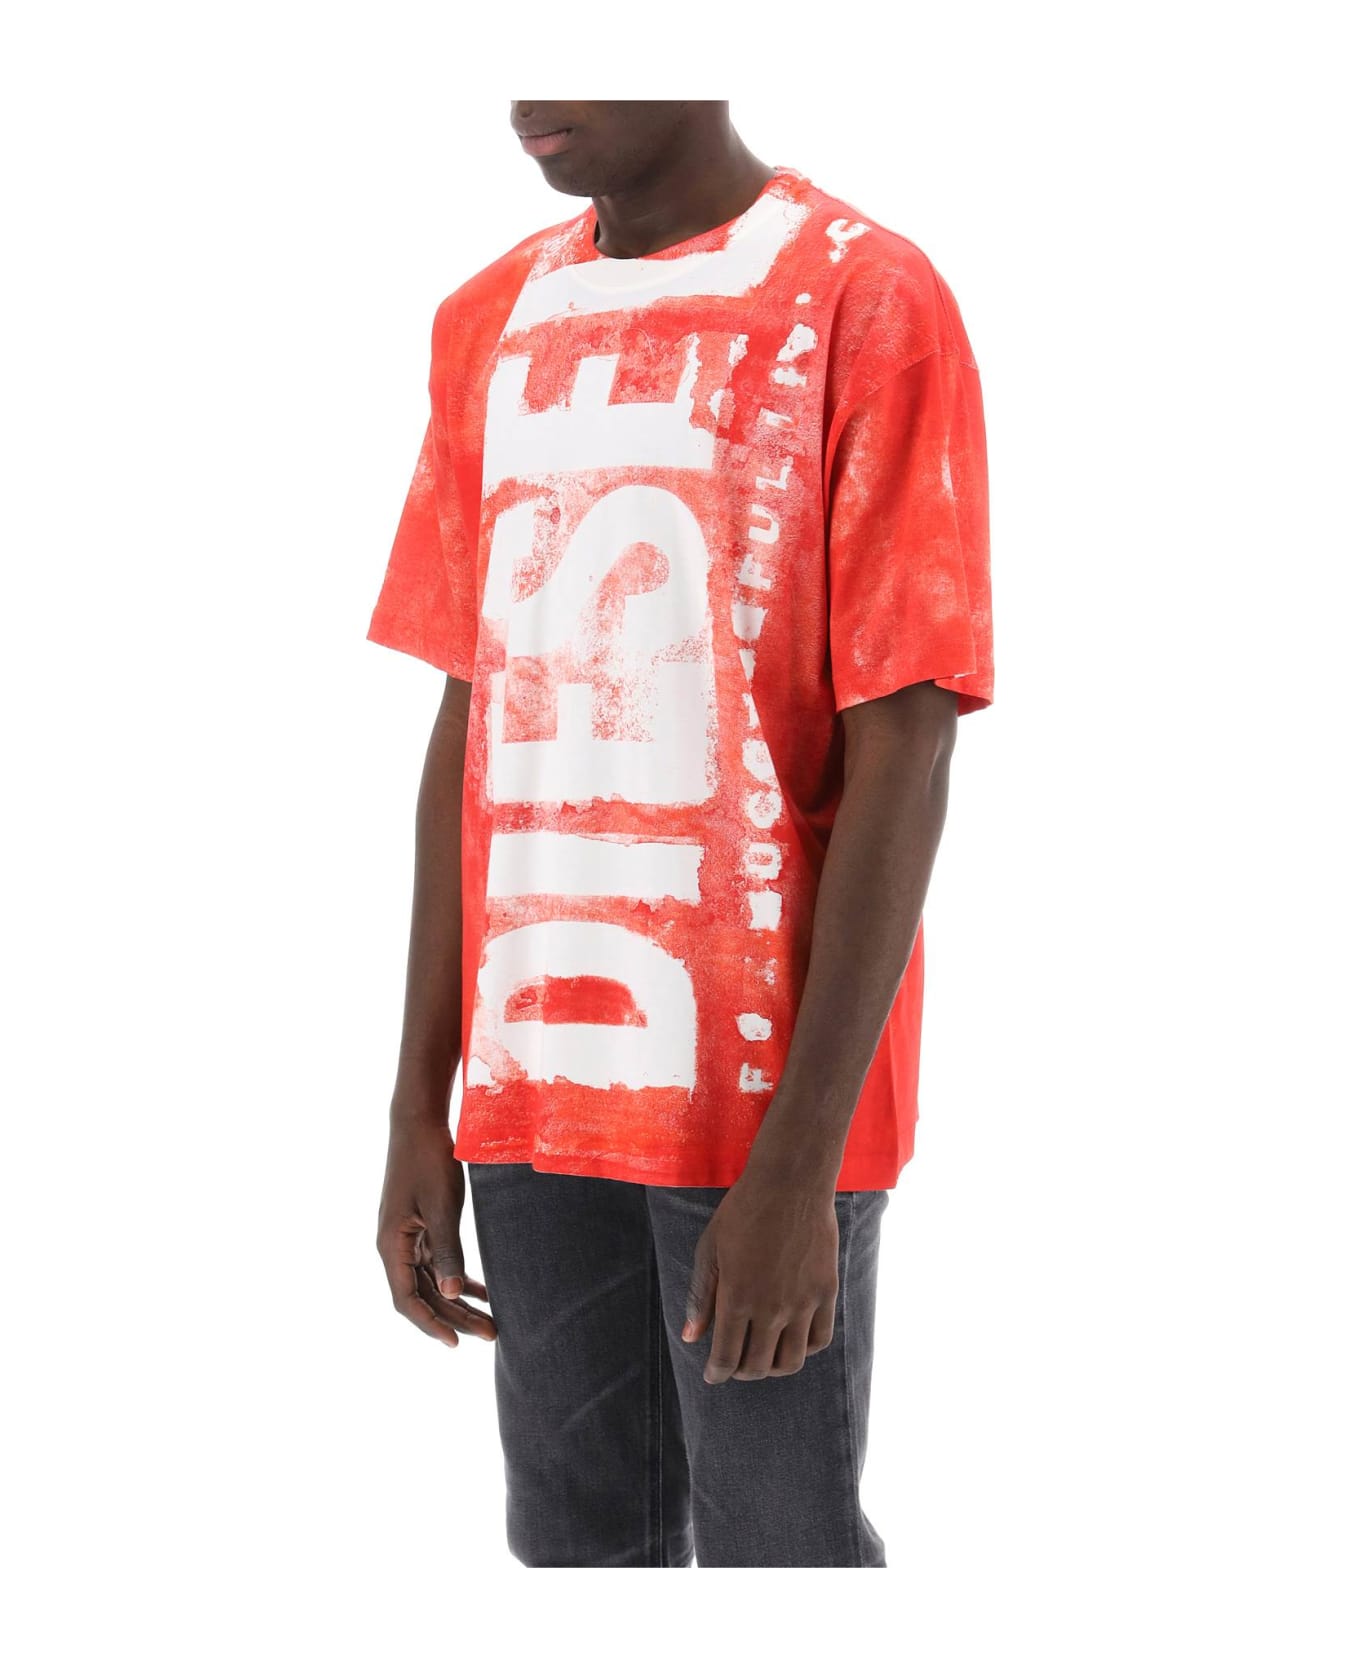 Diesel Printed T-shirt With Oversized Logo - Formula Red シャツ